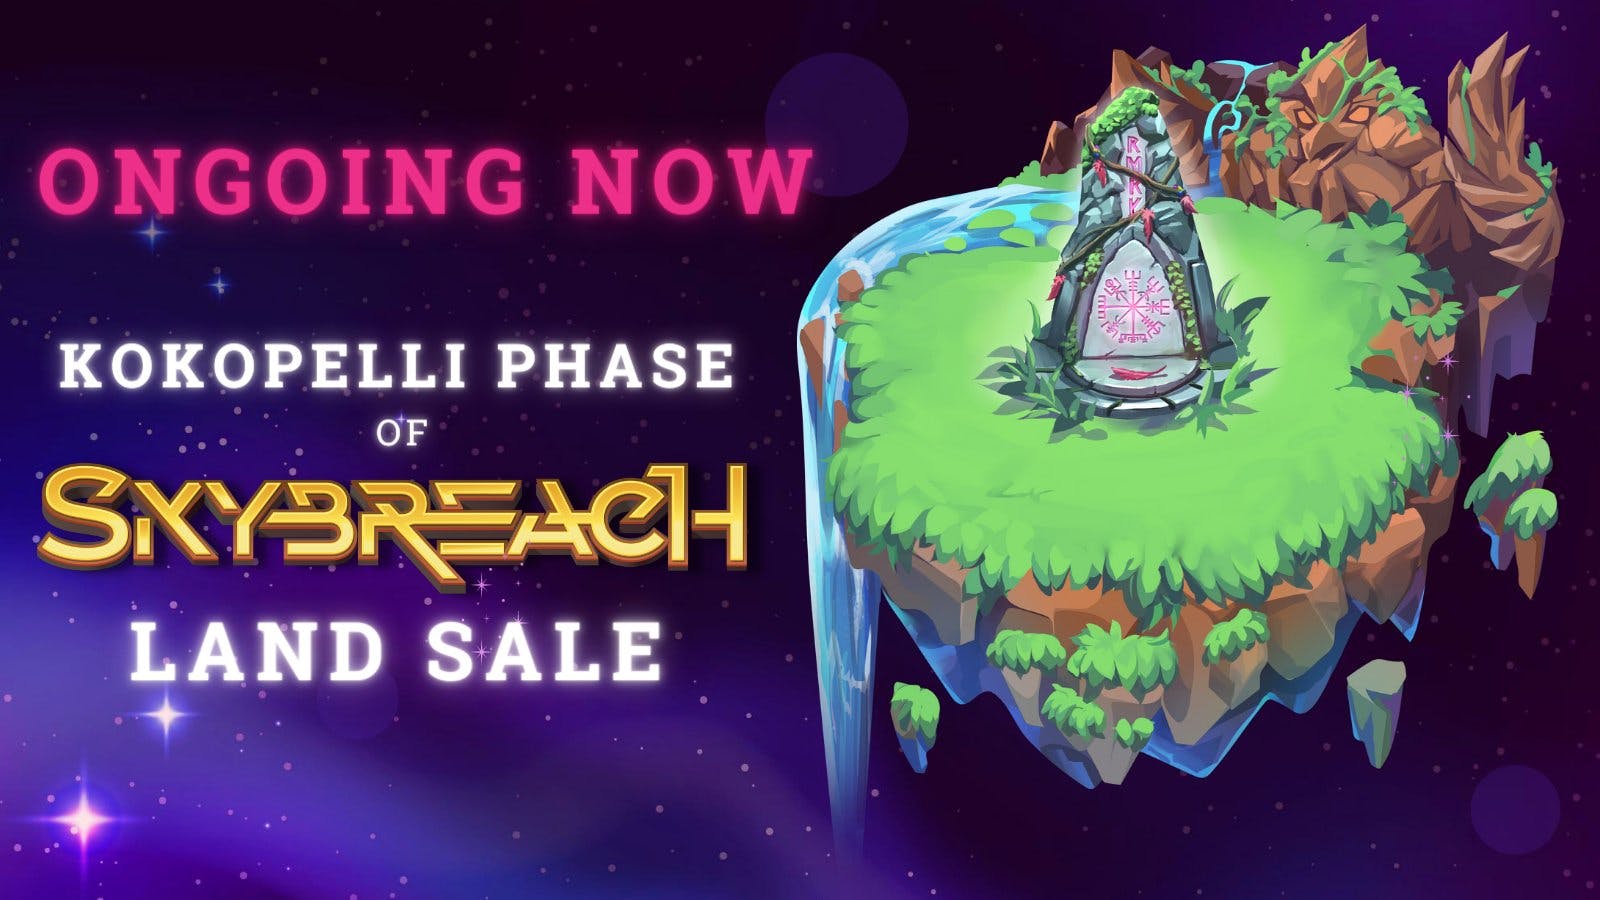 Skybreach Land Sale is HERE!